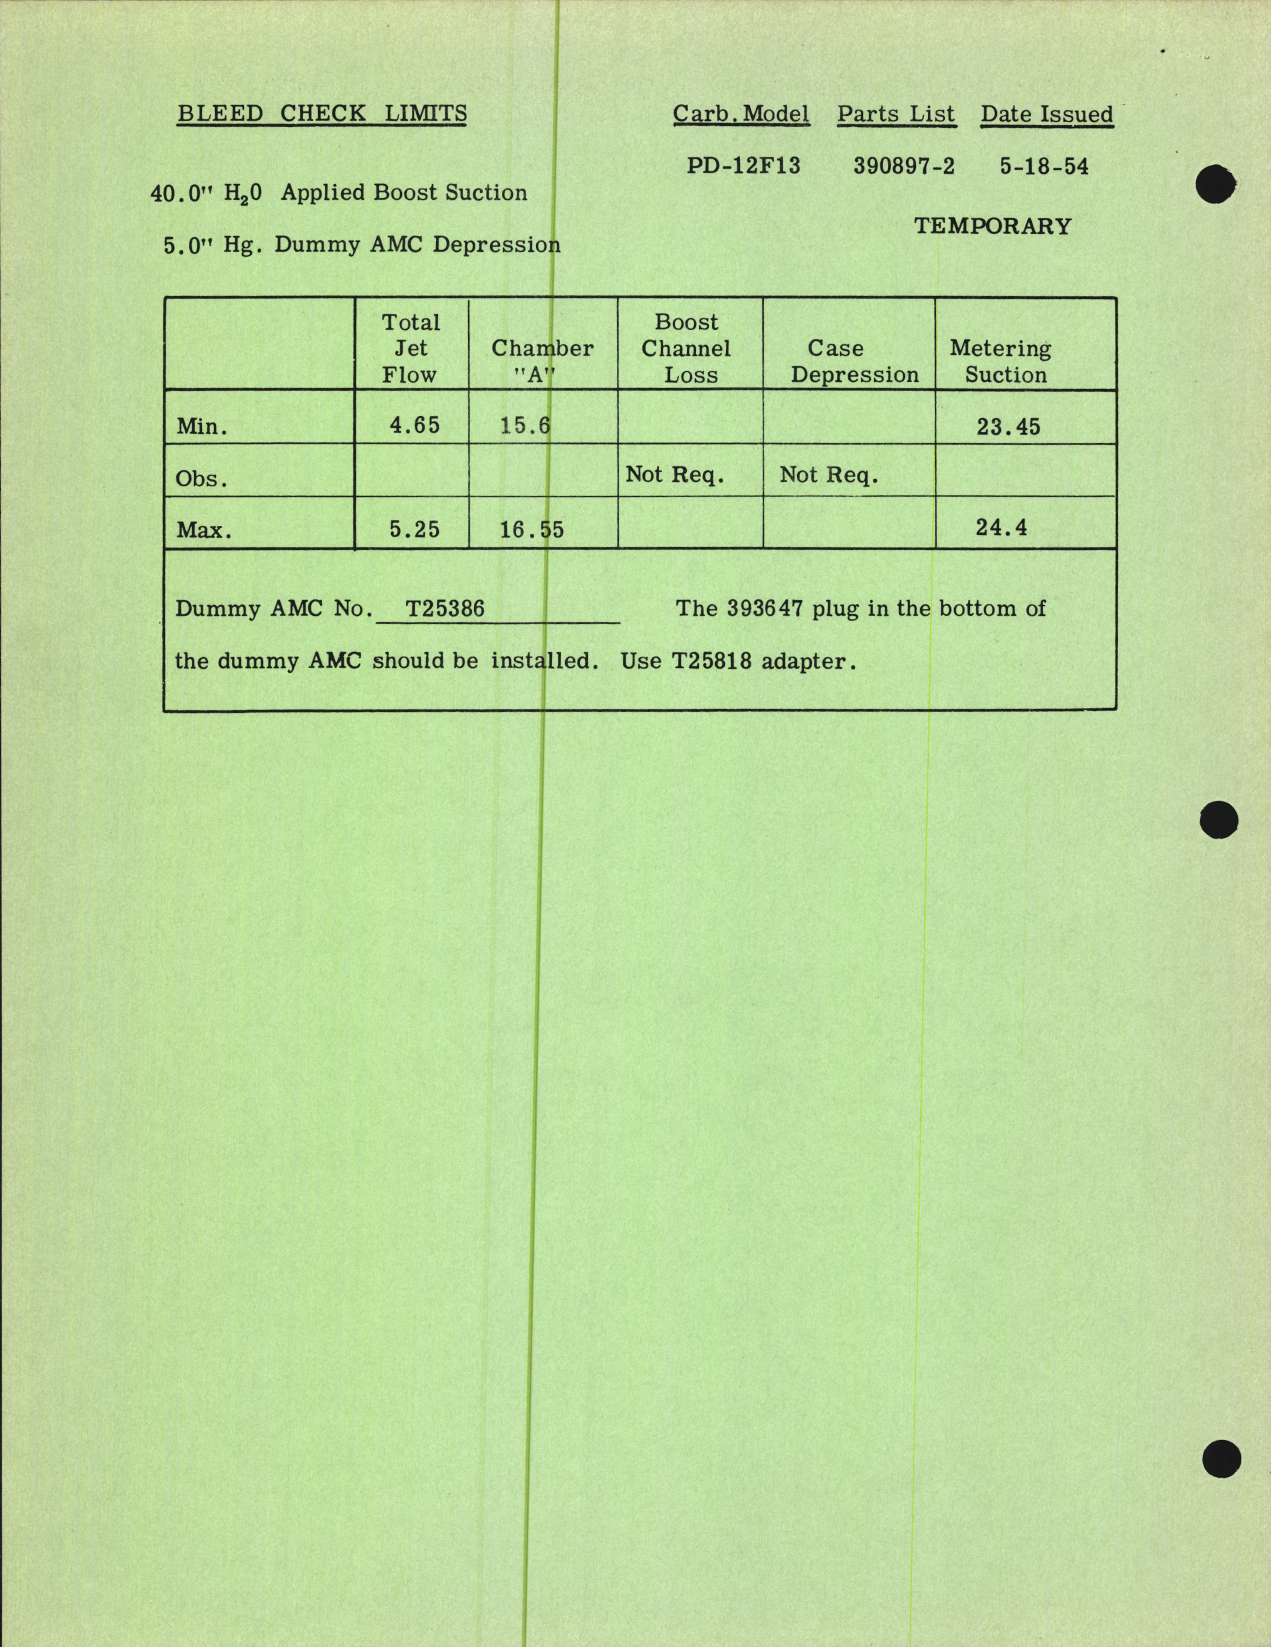 Sample page 5 from AirCorps Library document: Setting Specifications for Stromberg Injection Carburetor Model PD-12F13